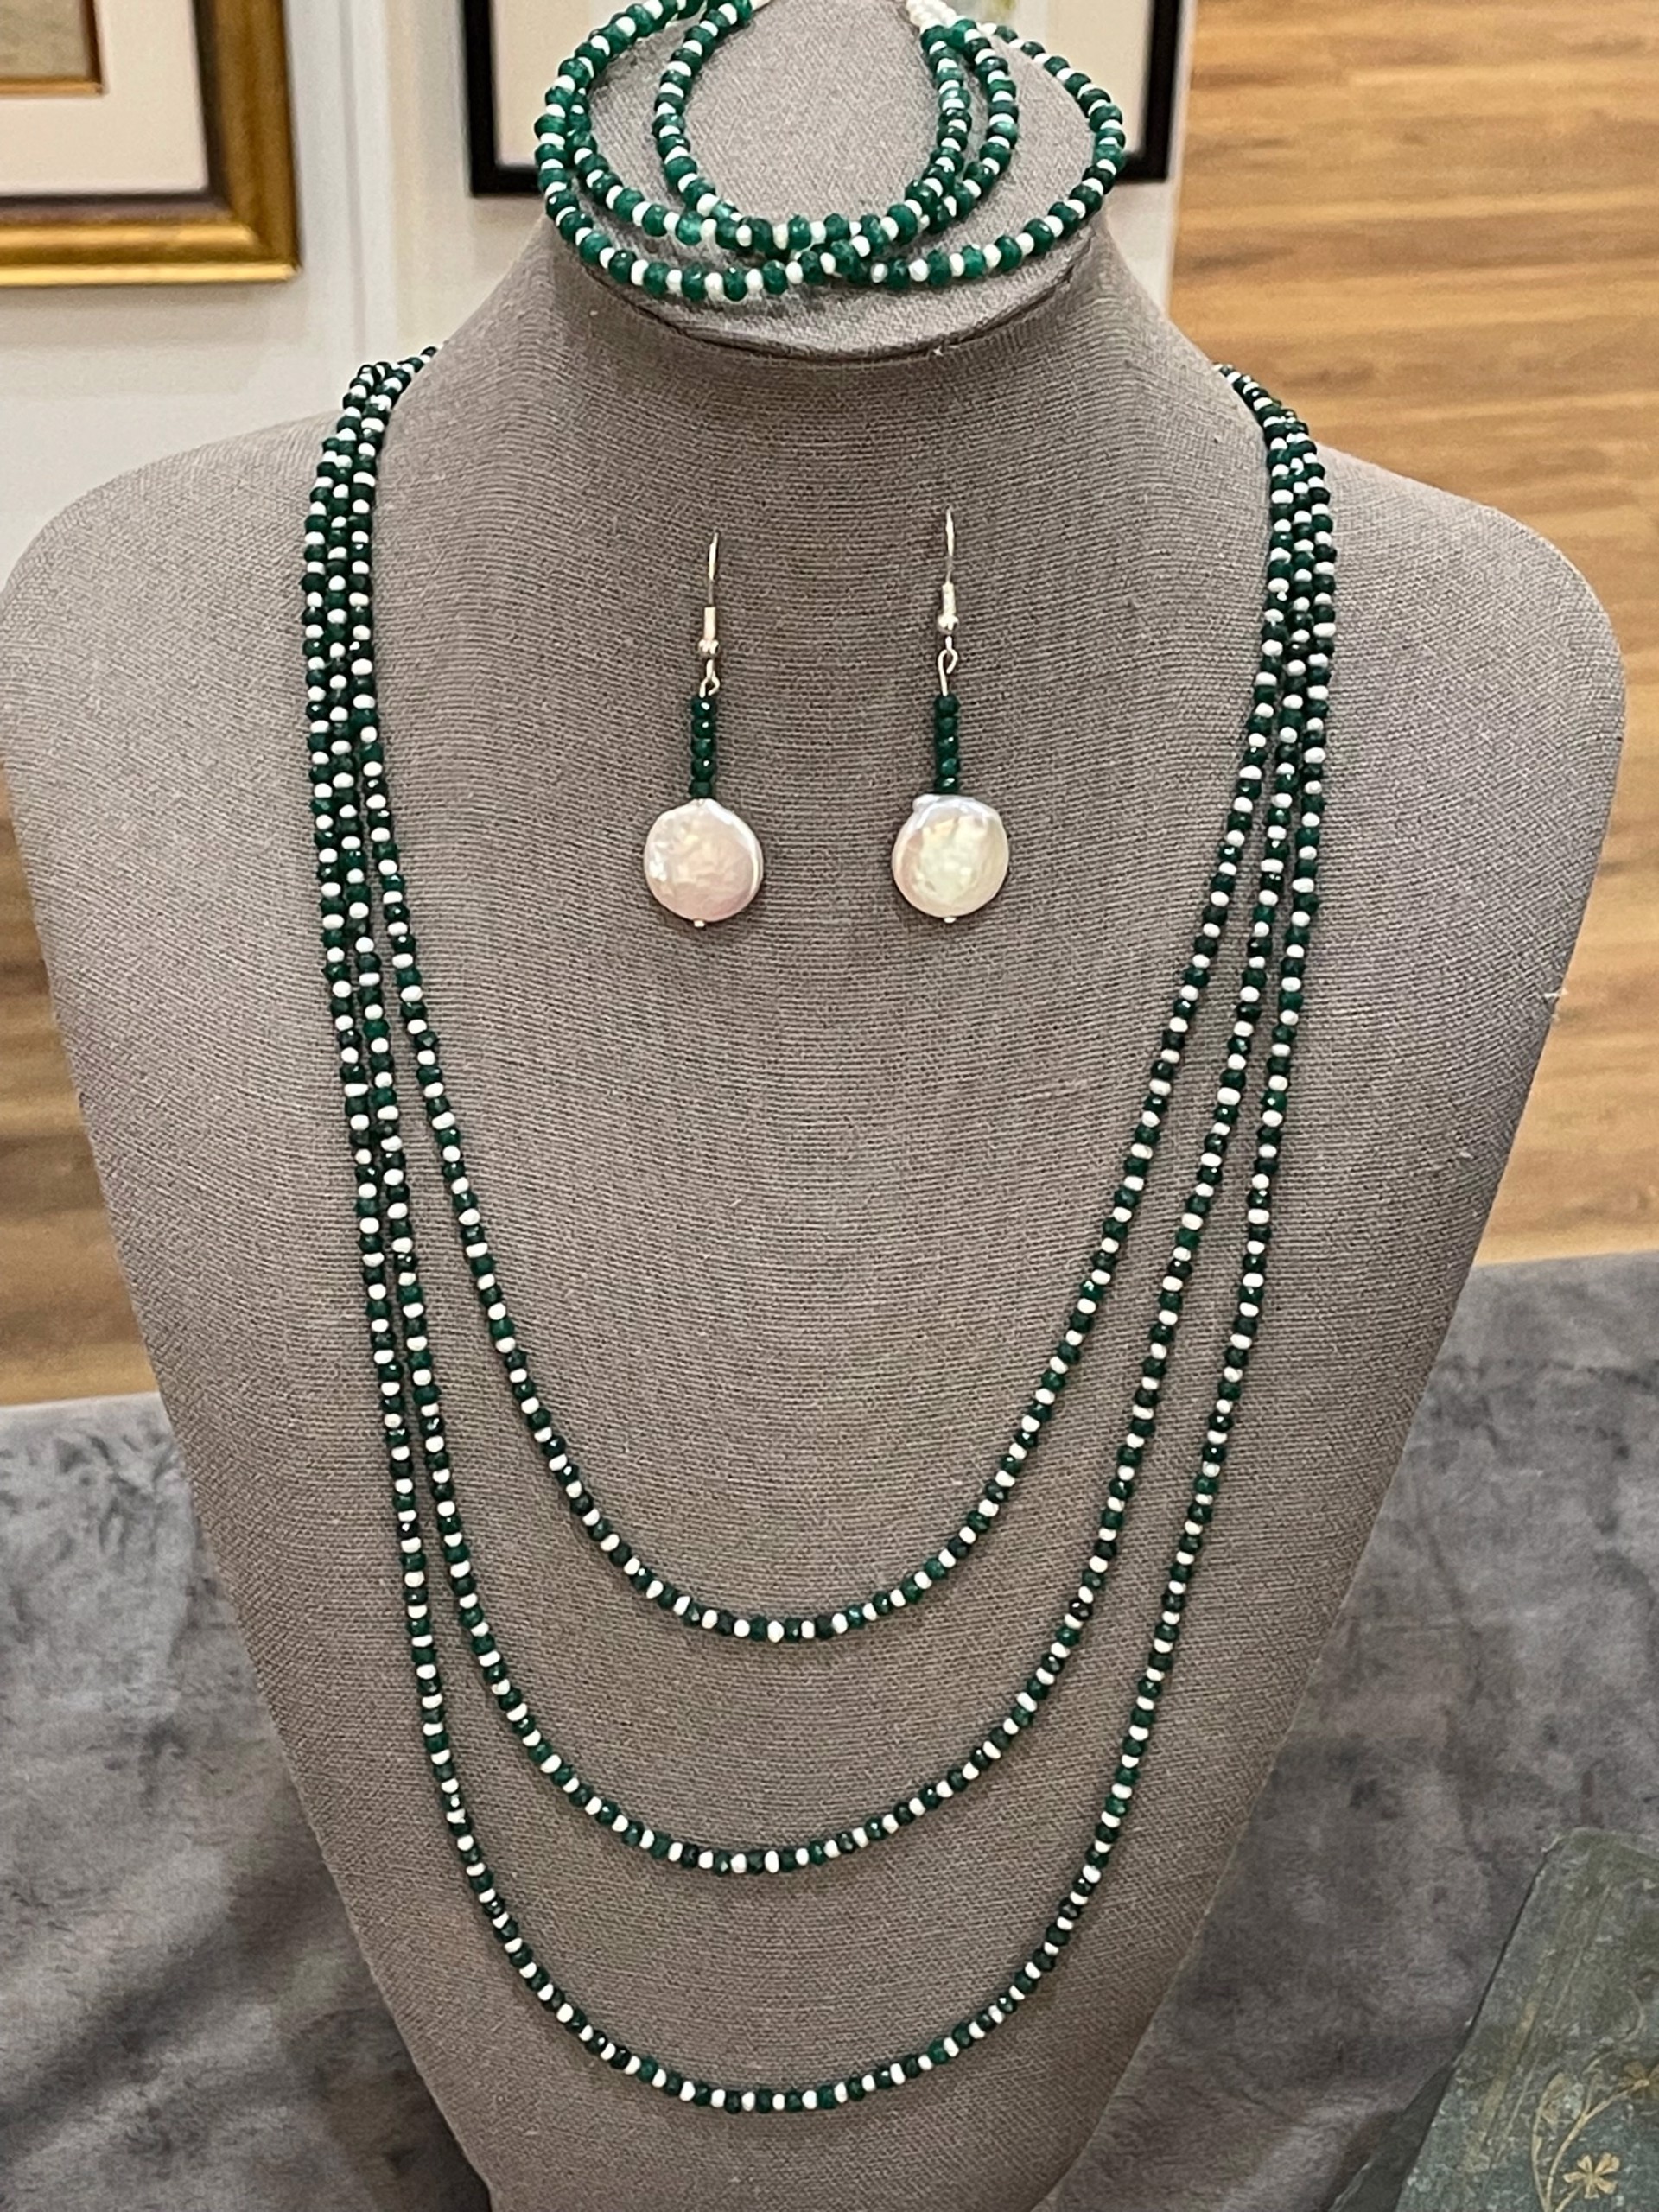 Pearl and Emerald Triple String Necklace, Bracelet, Earrings by Patrice Box